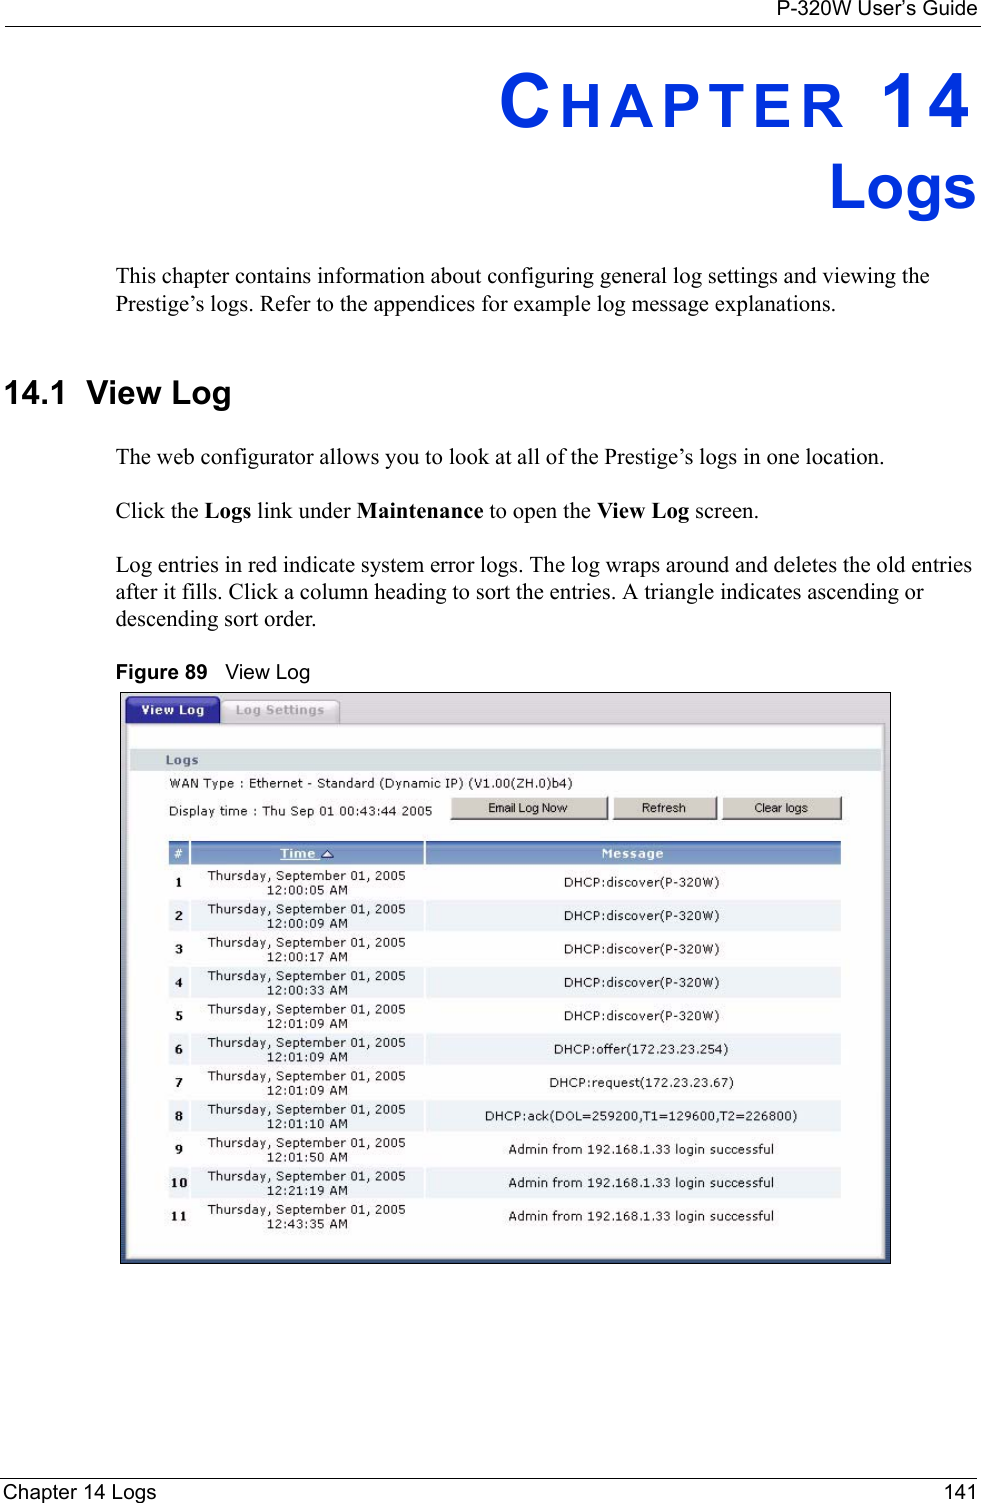 P-320W User’s GuideChapter 14 Logs 141CHAPTER 14LogsThis chapter contains information about configuring general log settings and viewing the Prestige’s logs. Refer to the appendices for example log message explanations.14.1  View Log The web configurator allows you to look at all of the Prestige’s logs in one location. Click the Logs link under Maintenance to open the View Log screen. Log entries in red indicate system error logs. The log wraps around and deletes the old entries after it fills. Click a column heading to sort the entries. A triangle indicates ascending or descending sort order. Figure 89   View Log